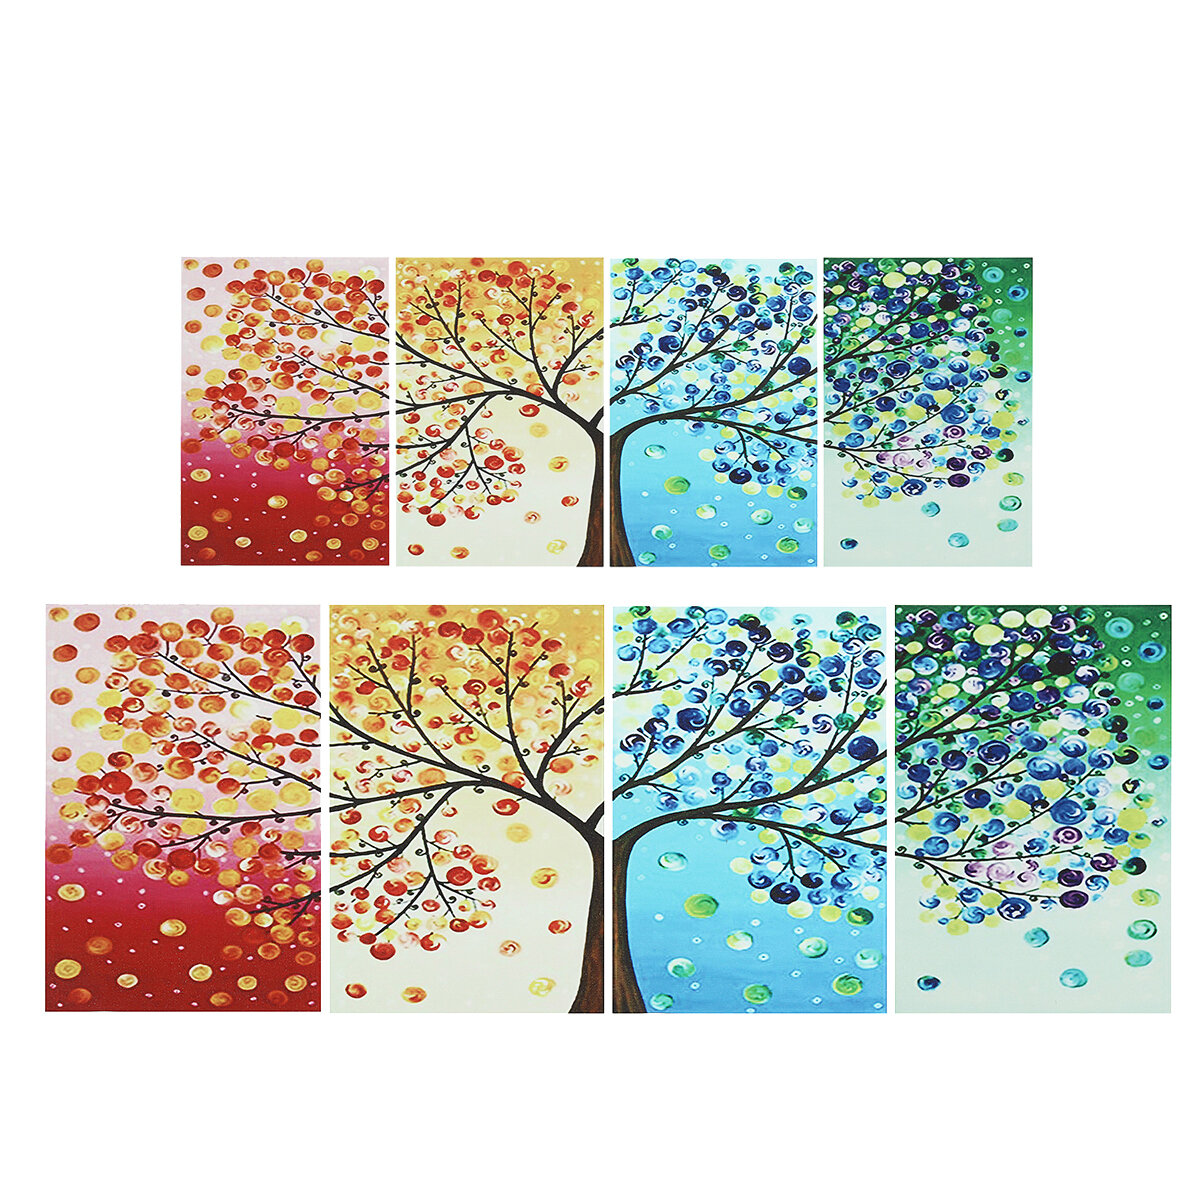 

4pcs Canvas Print Painting Wall Decor Four Seasons and Trees Wall Hanging Decorative Art Pictures Frameless for Home Off